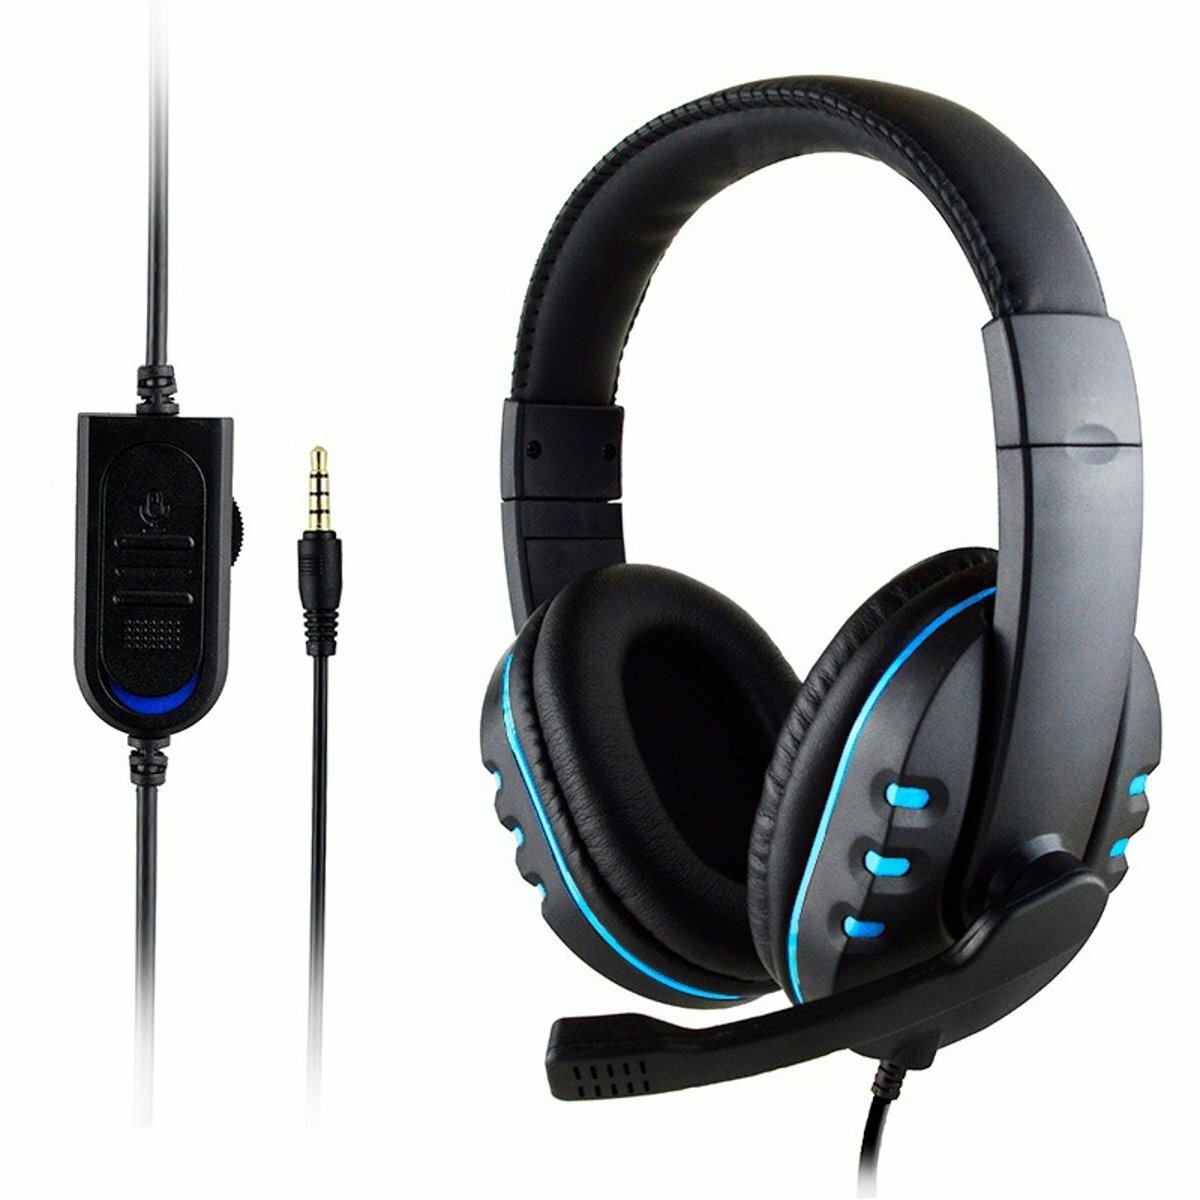 

Portable Gaming Headset 3.5mm Stereo Surround Gamer Wired Headphone With Mic for PC Computer PS4 Xbox